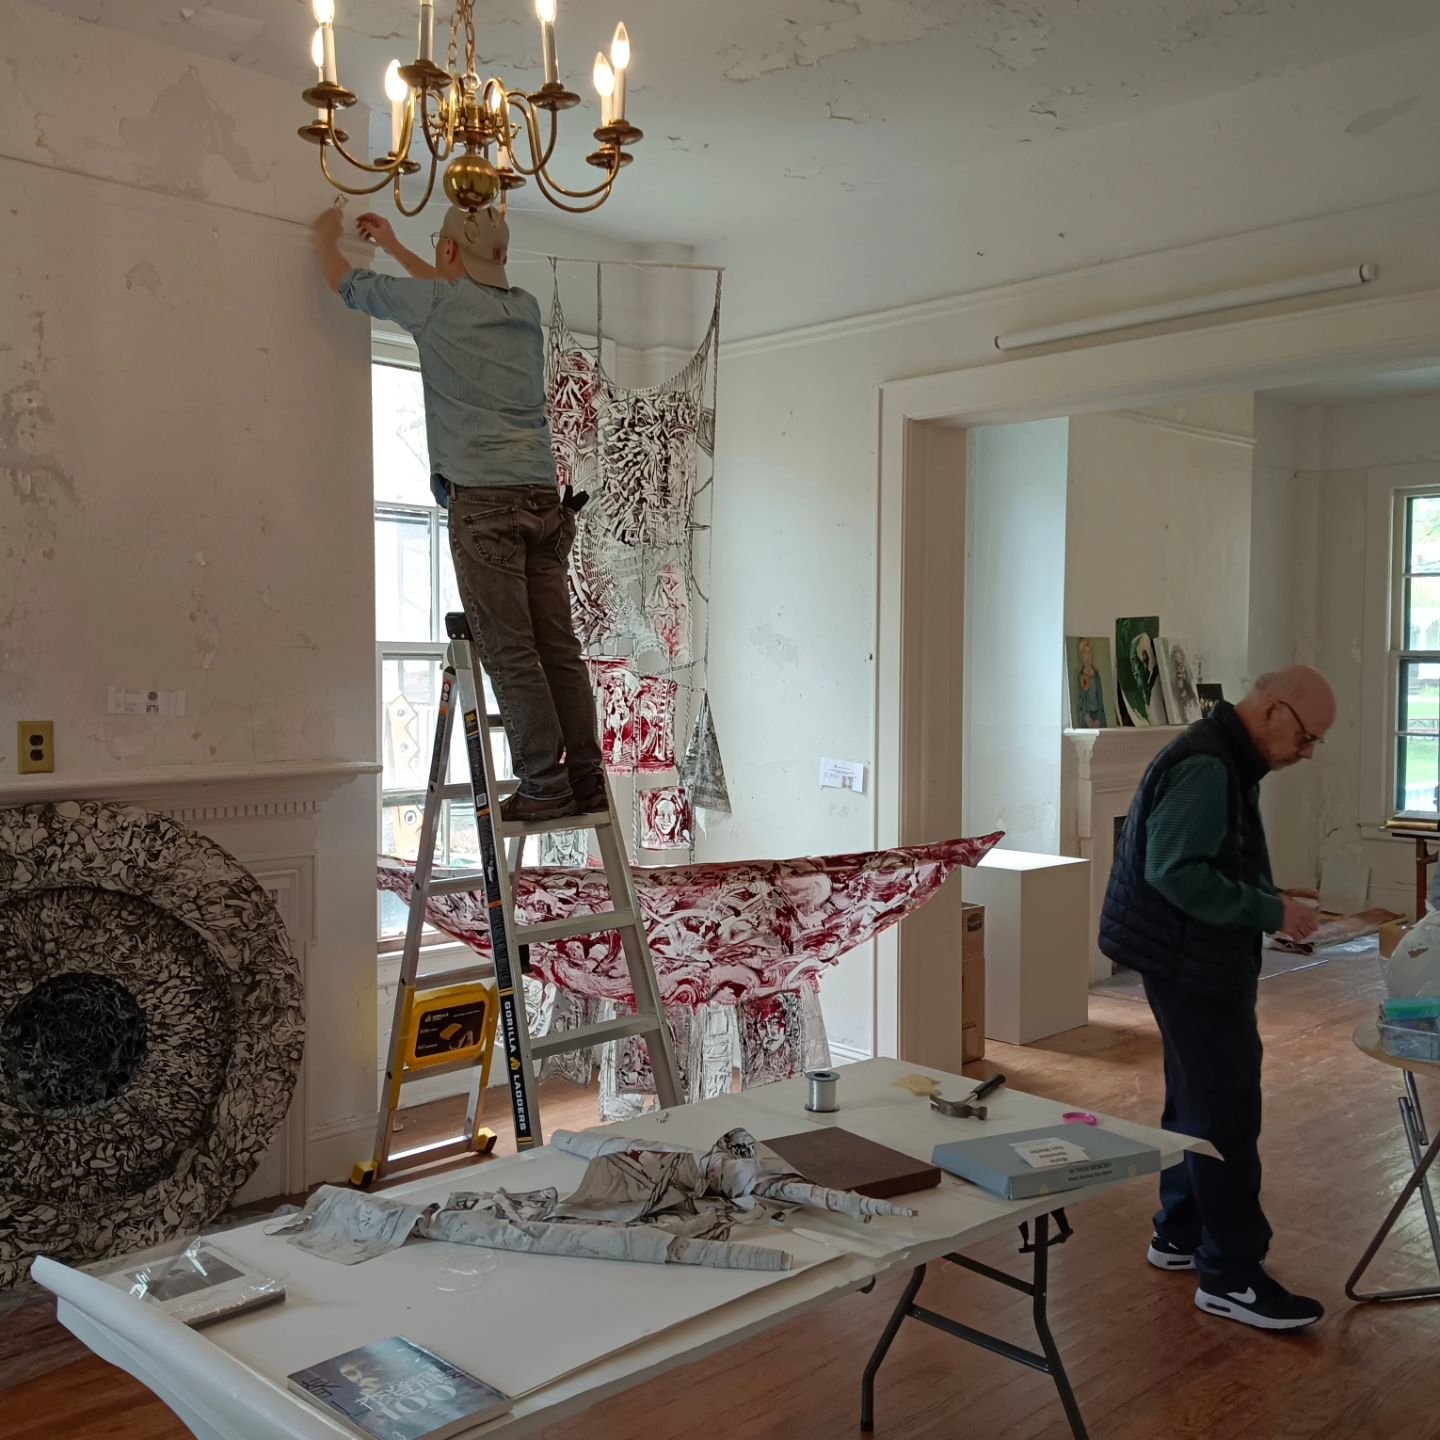 Governors Island 🏝 Nolan Park House 7b we made progress of 2nd day installation. The exhibition will be open to the public on May 10. Check with us. #peoplesmoverments #sunflowermovement #10thanniversary #GovIslandArts @luchia.lee @kuojohn_347 @khll